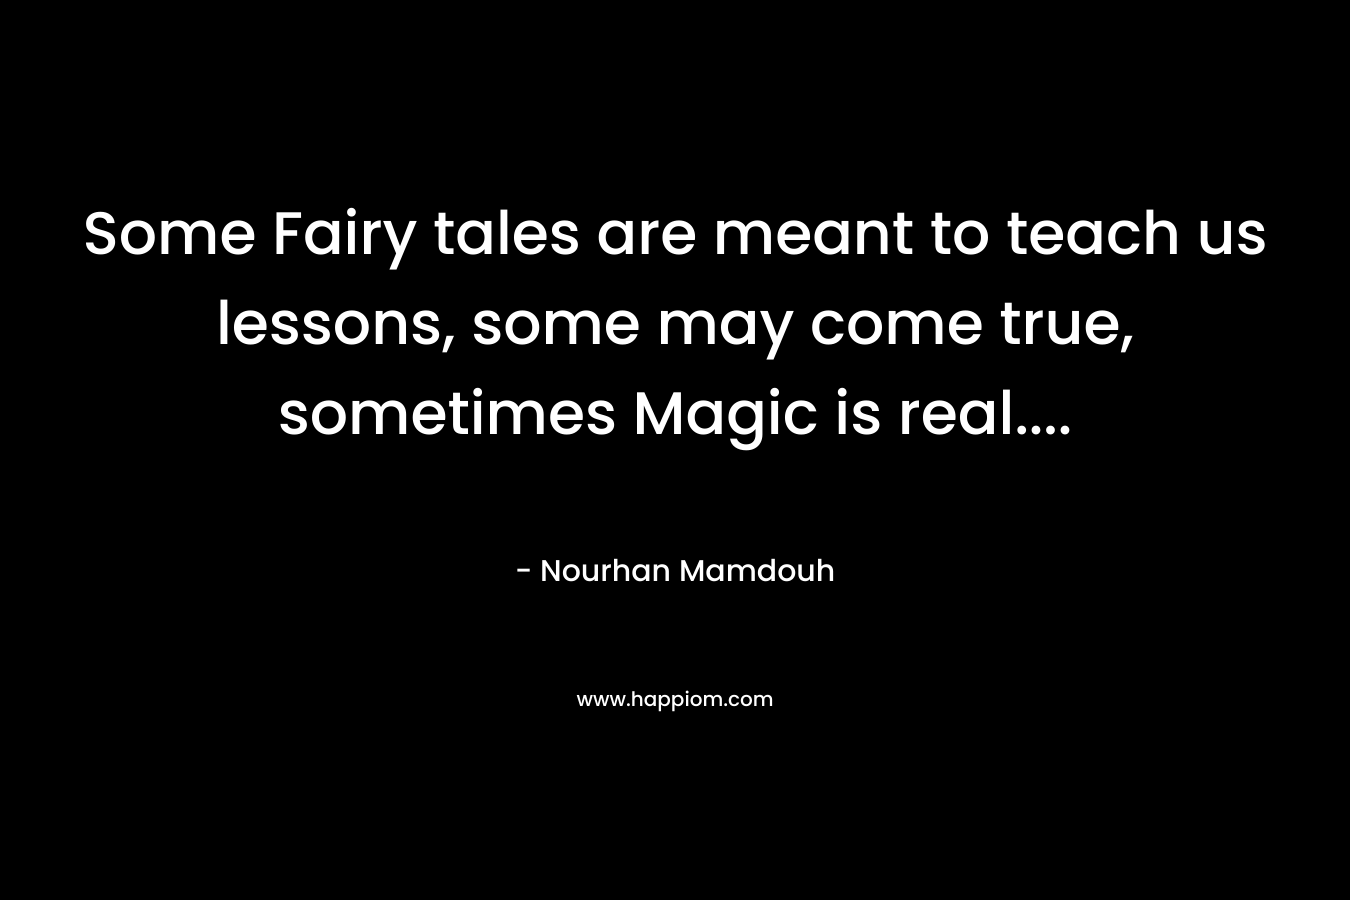 Some Fairy tales are meant to teach us lessons, some may come true, sometimes Magic is real…. – Nourhan Mamdouh